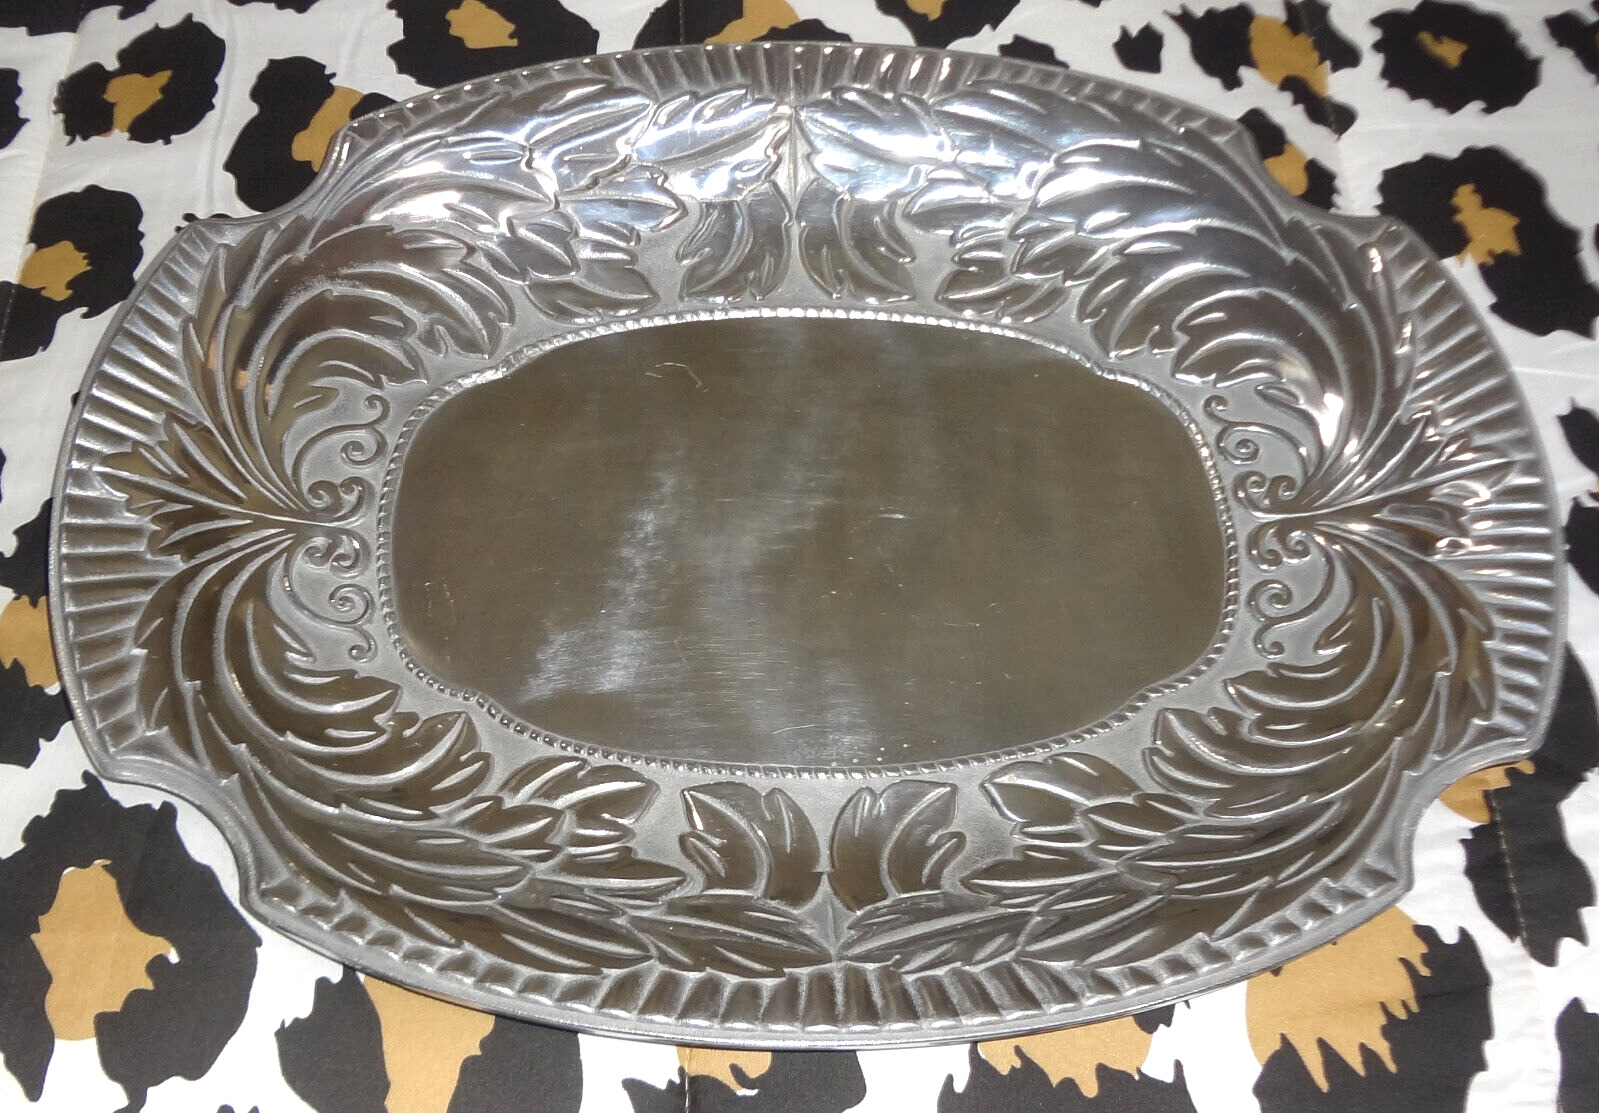 WILTON ARMETALE ACANTHUS #373554 LARGE OVAL TRAY 19 x 15 PEWTER SERVING PLATTER